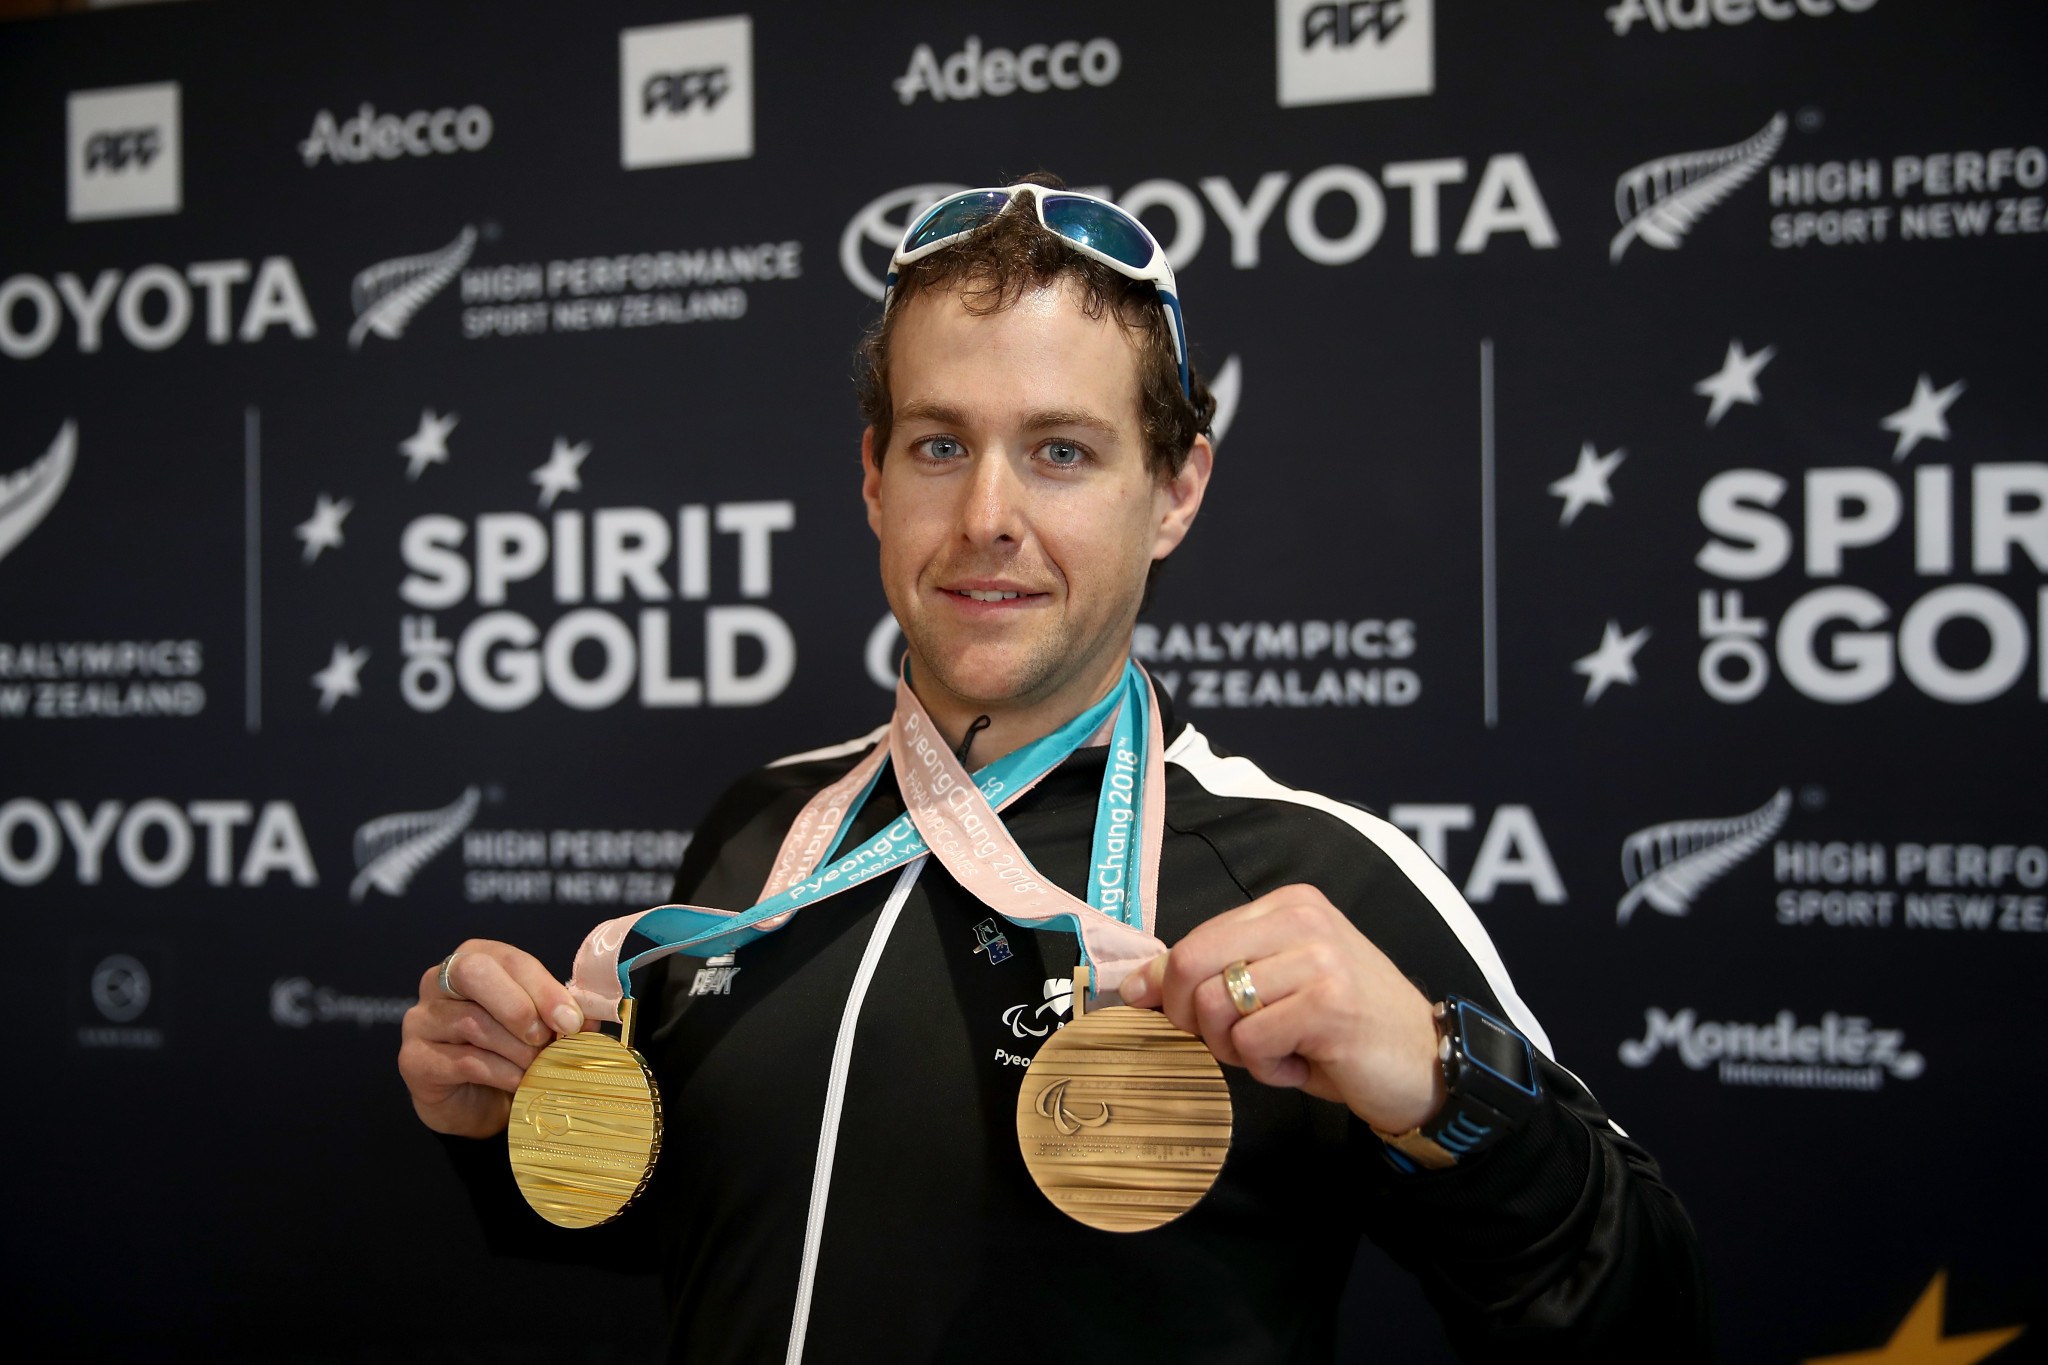 Adam Hall of New Zealand won his second Paralympic Alpine skiing gold medal as well as a bronze at Pyeongchang 2018 ©Getty Images